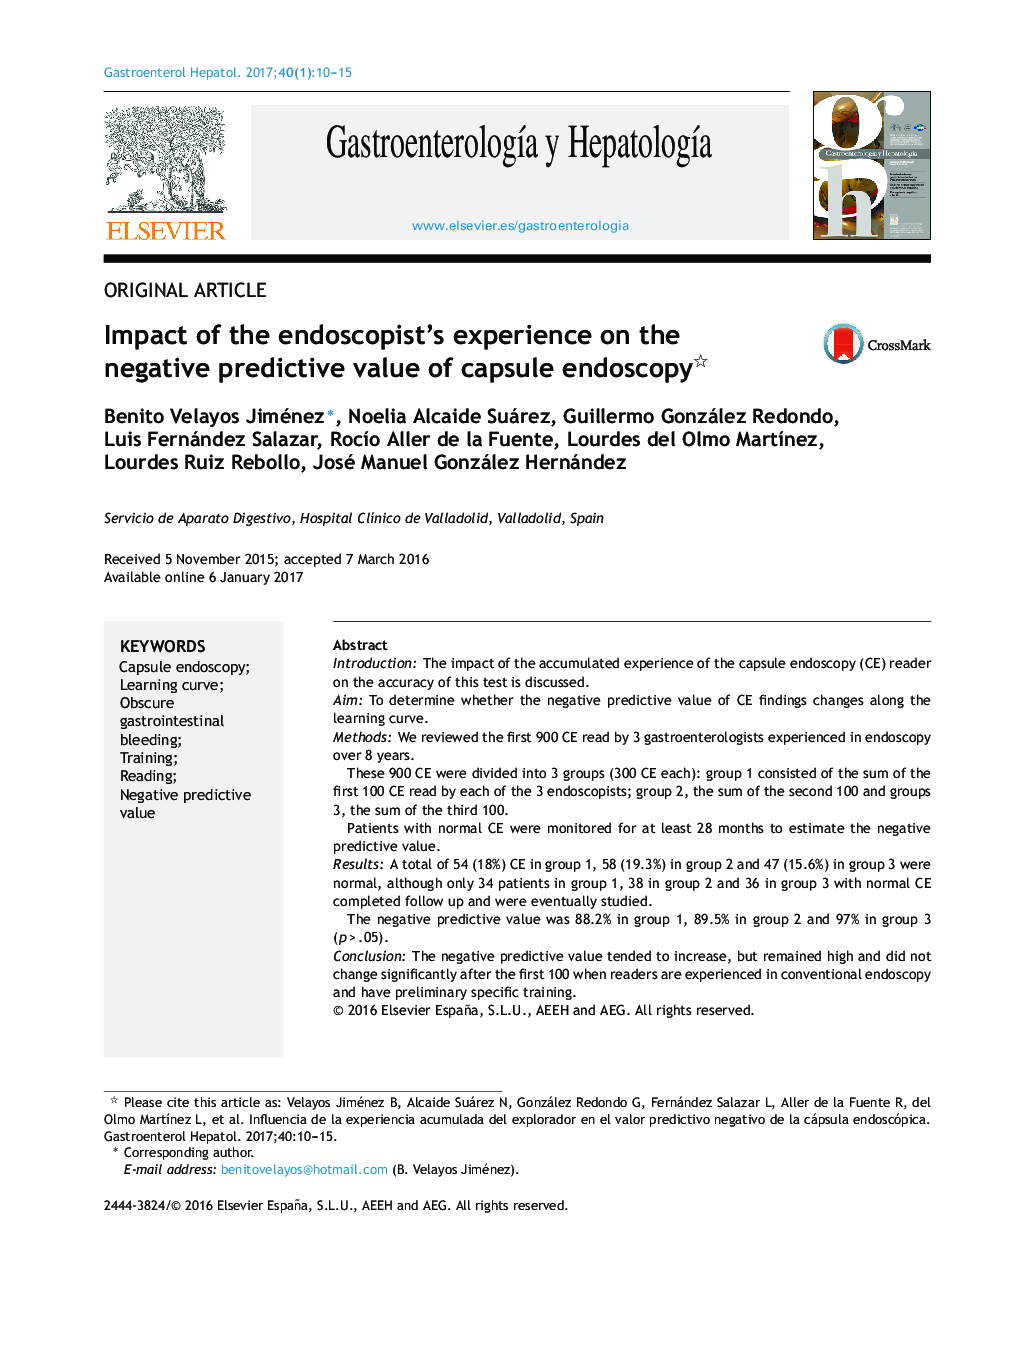 Impact of the endoscopist's experience on the negative predictive value of capsule endoscopy